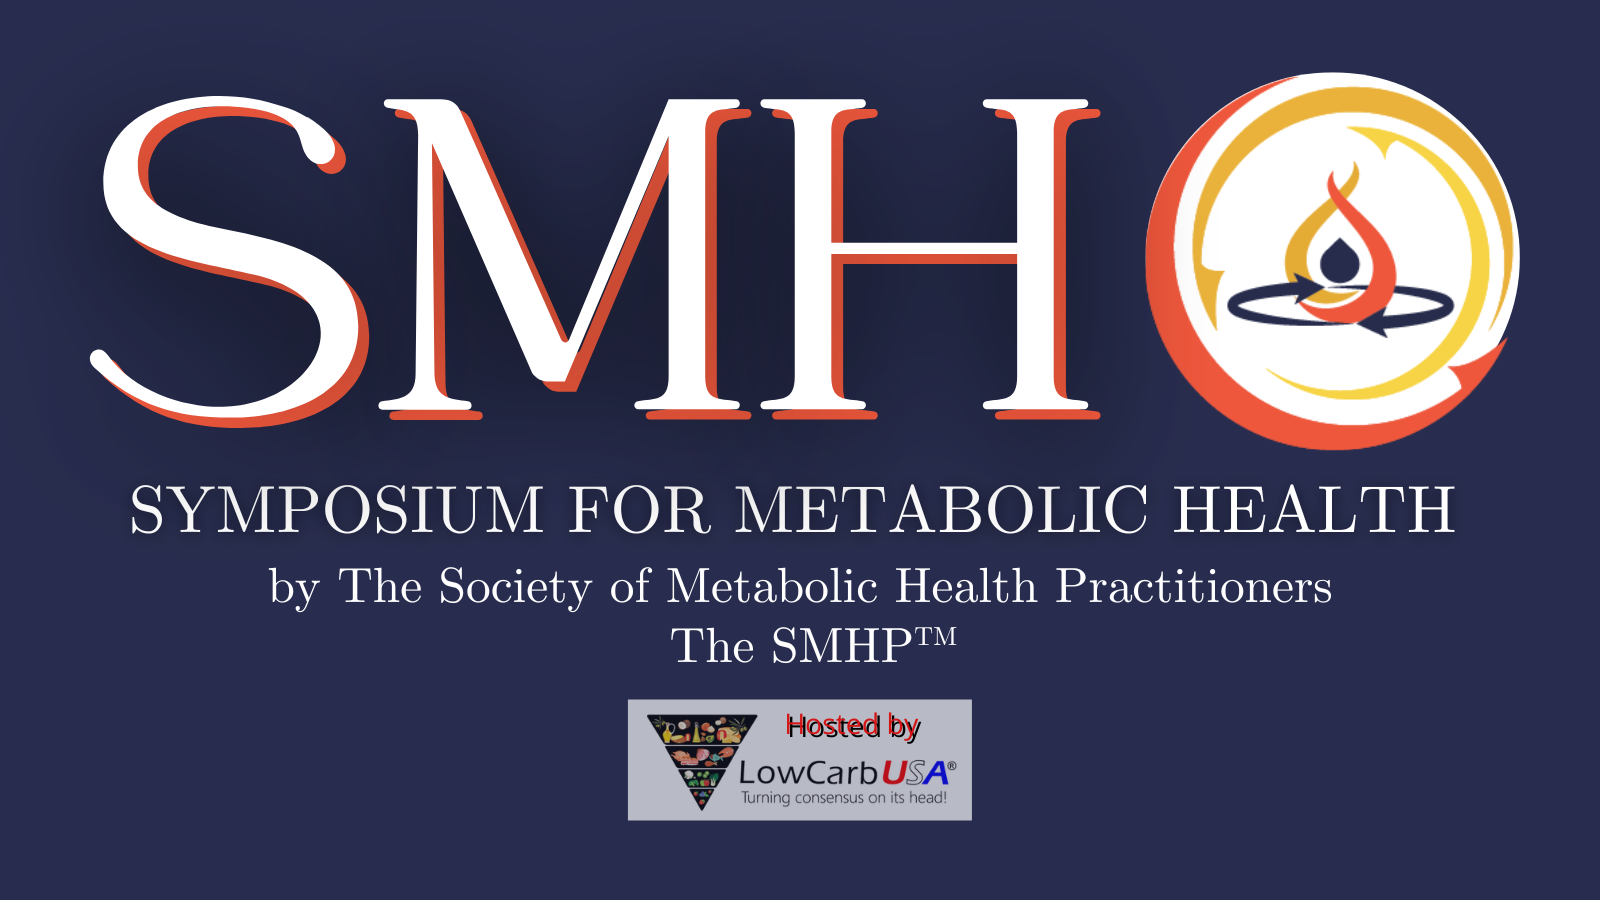 z REVISEDE4 - Symposium for Metabolic Health (1600 × 900 px) (1)